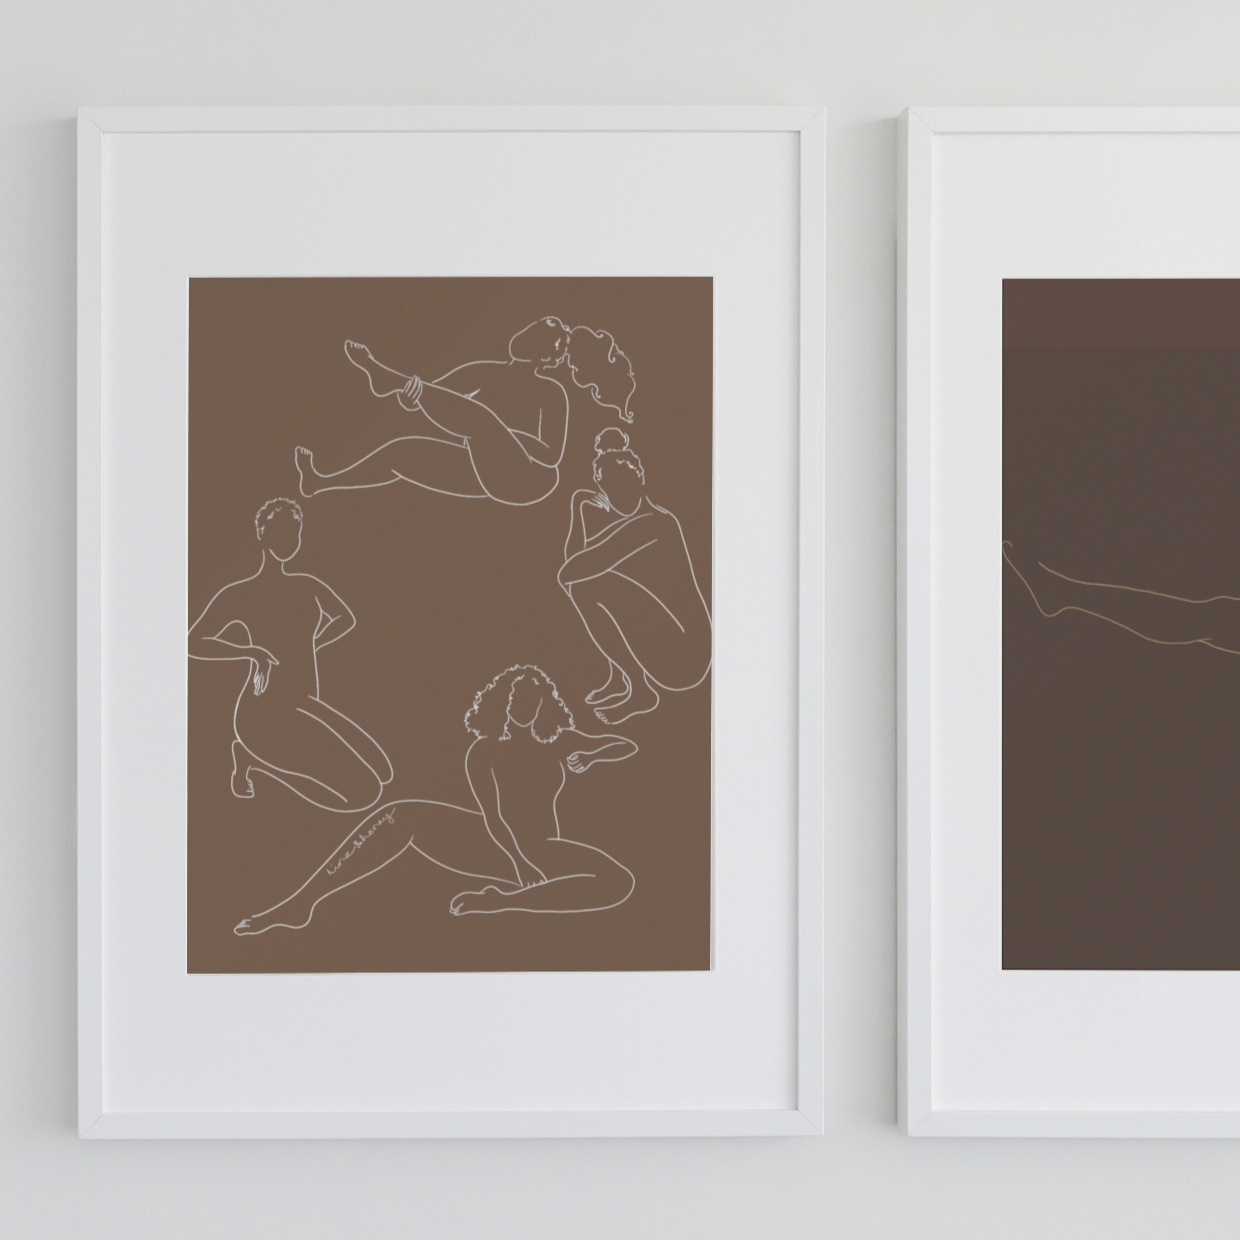 'Variations of each other' art print